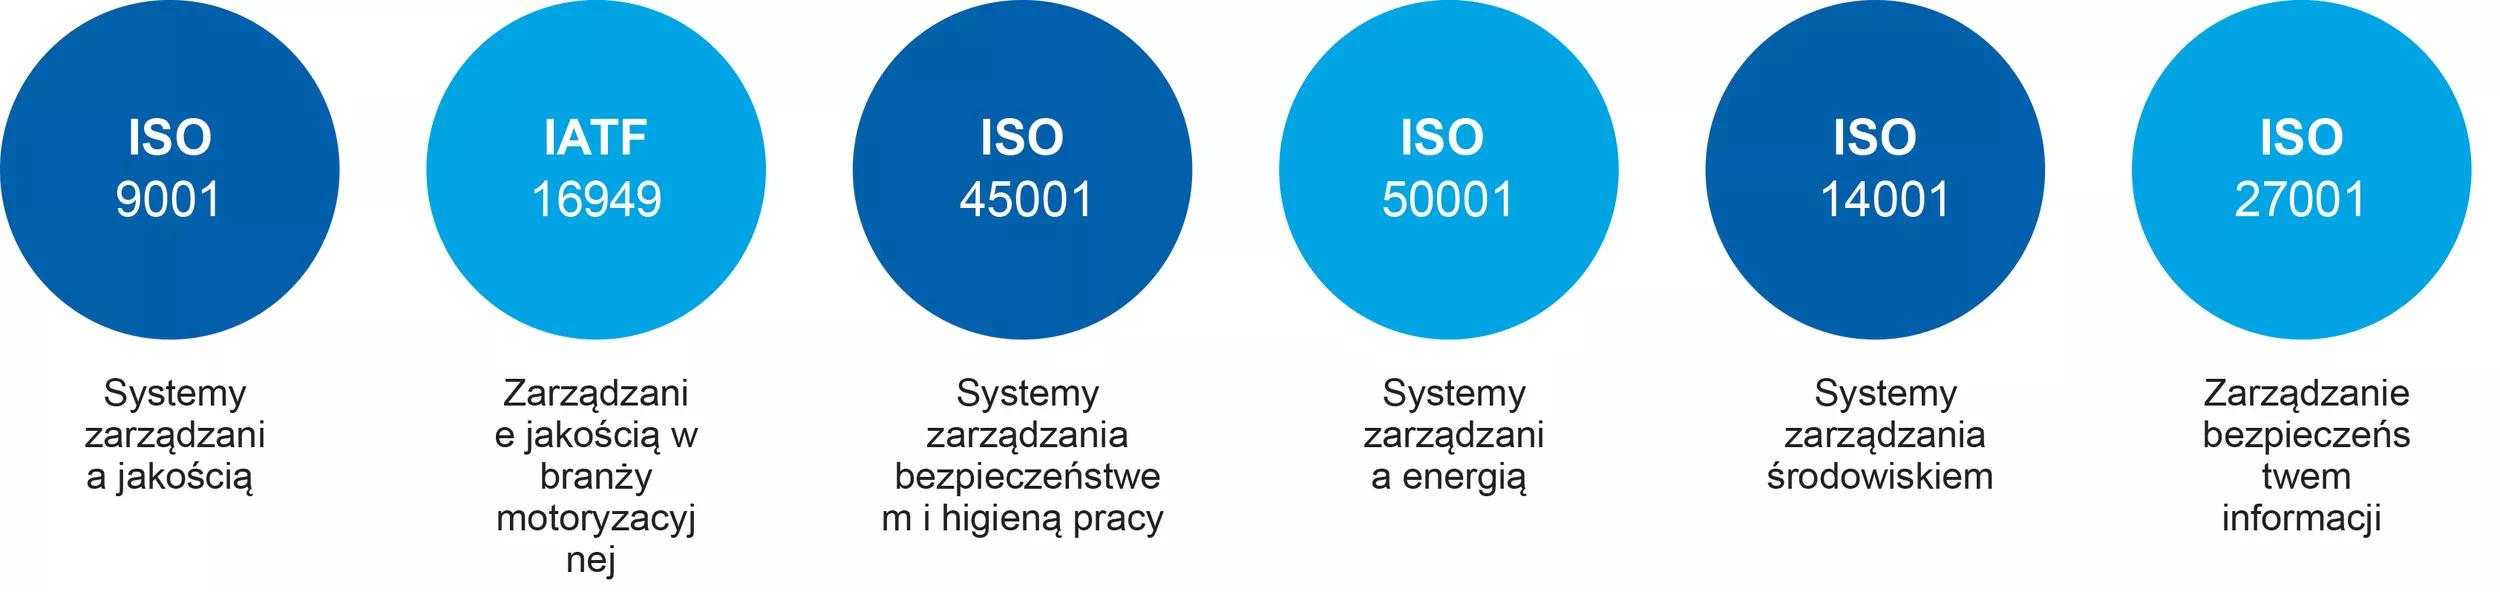 ISO-PL